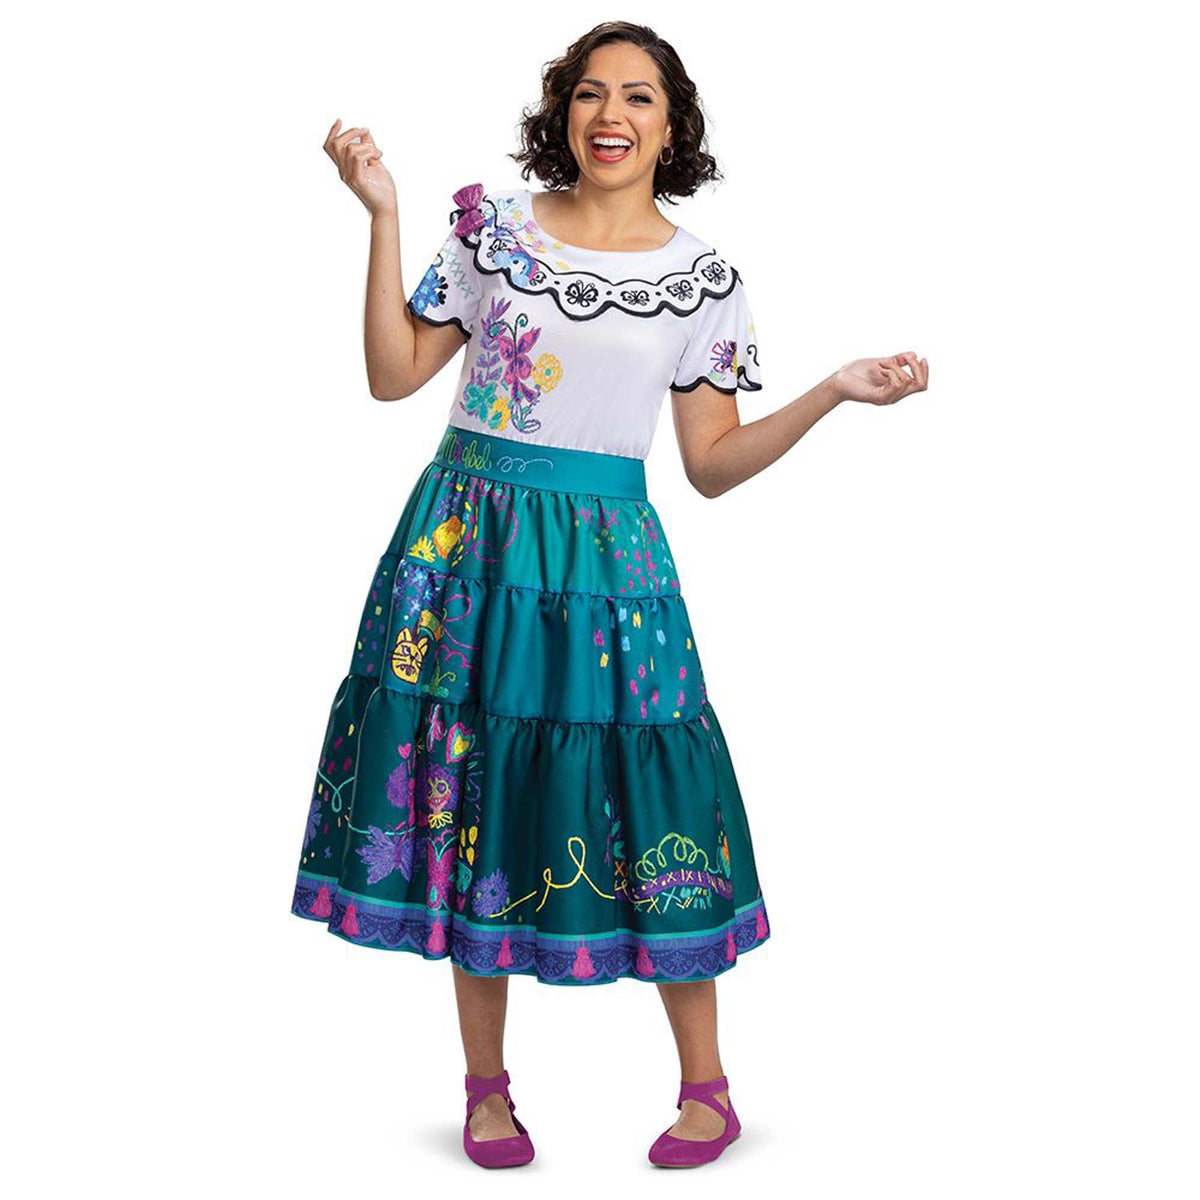 DISGUISE (TOY-SPORT) Costumes Disney Encanto Mirabel Deluxe Dress Costume for Adults, Floral Dress